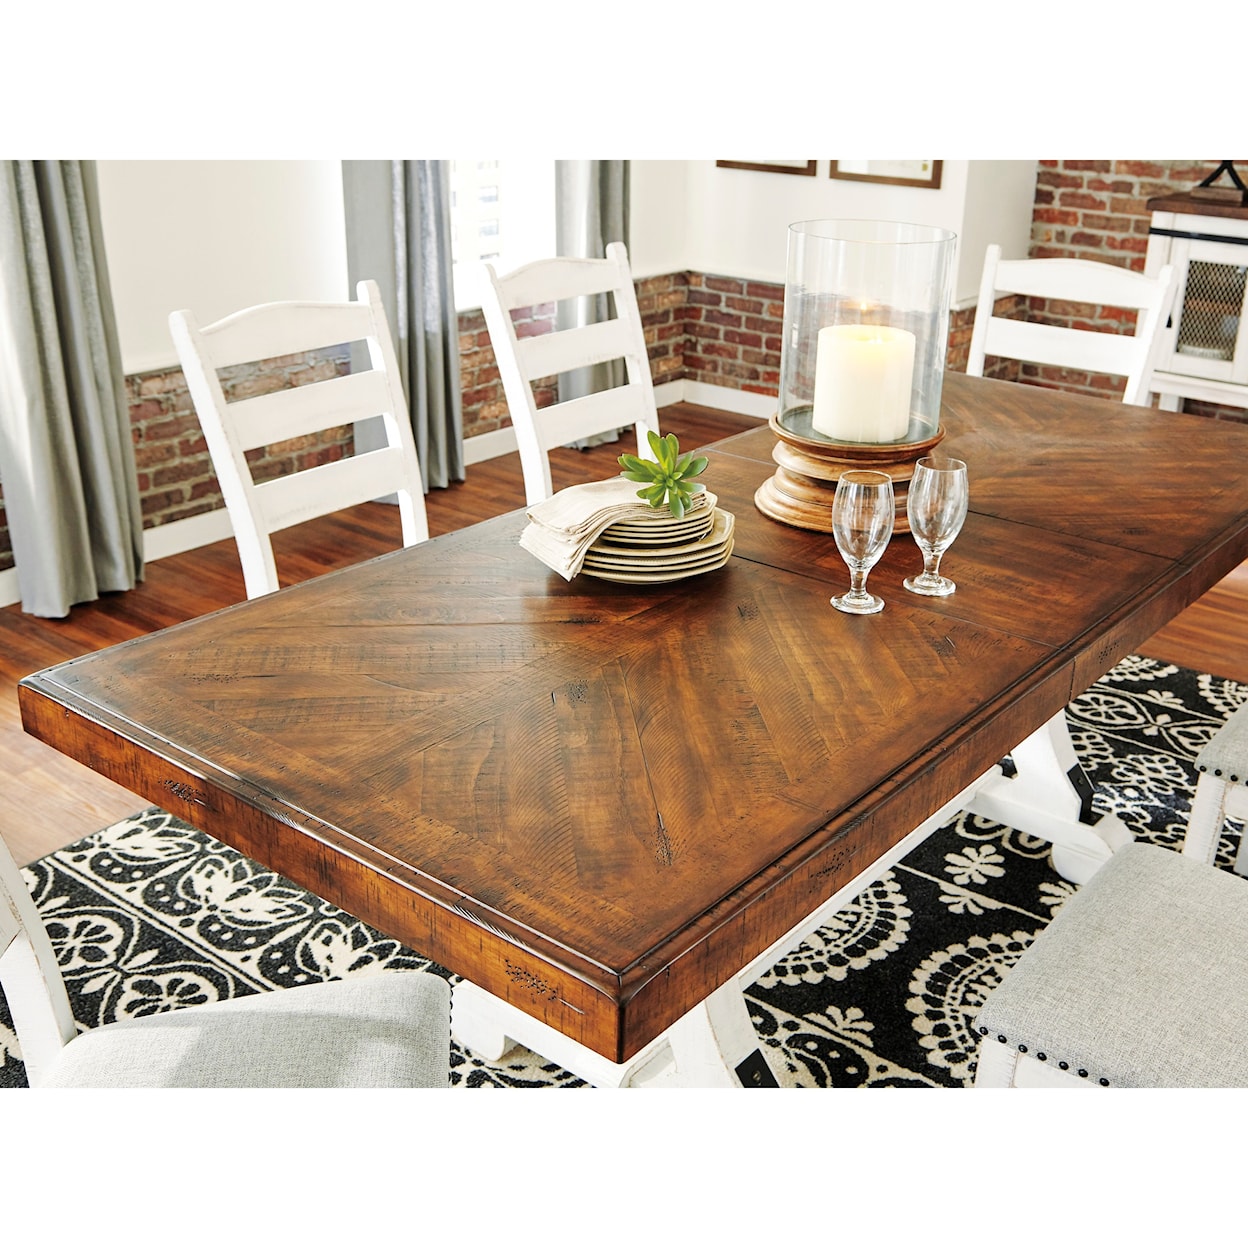 Signature Design by Ashley Furniture Valebeck Rectangular Dining Room Table